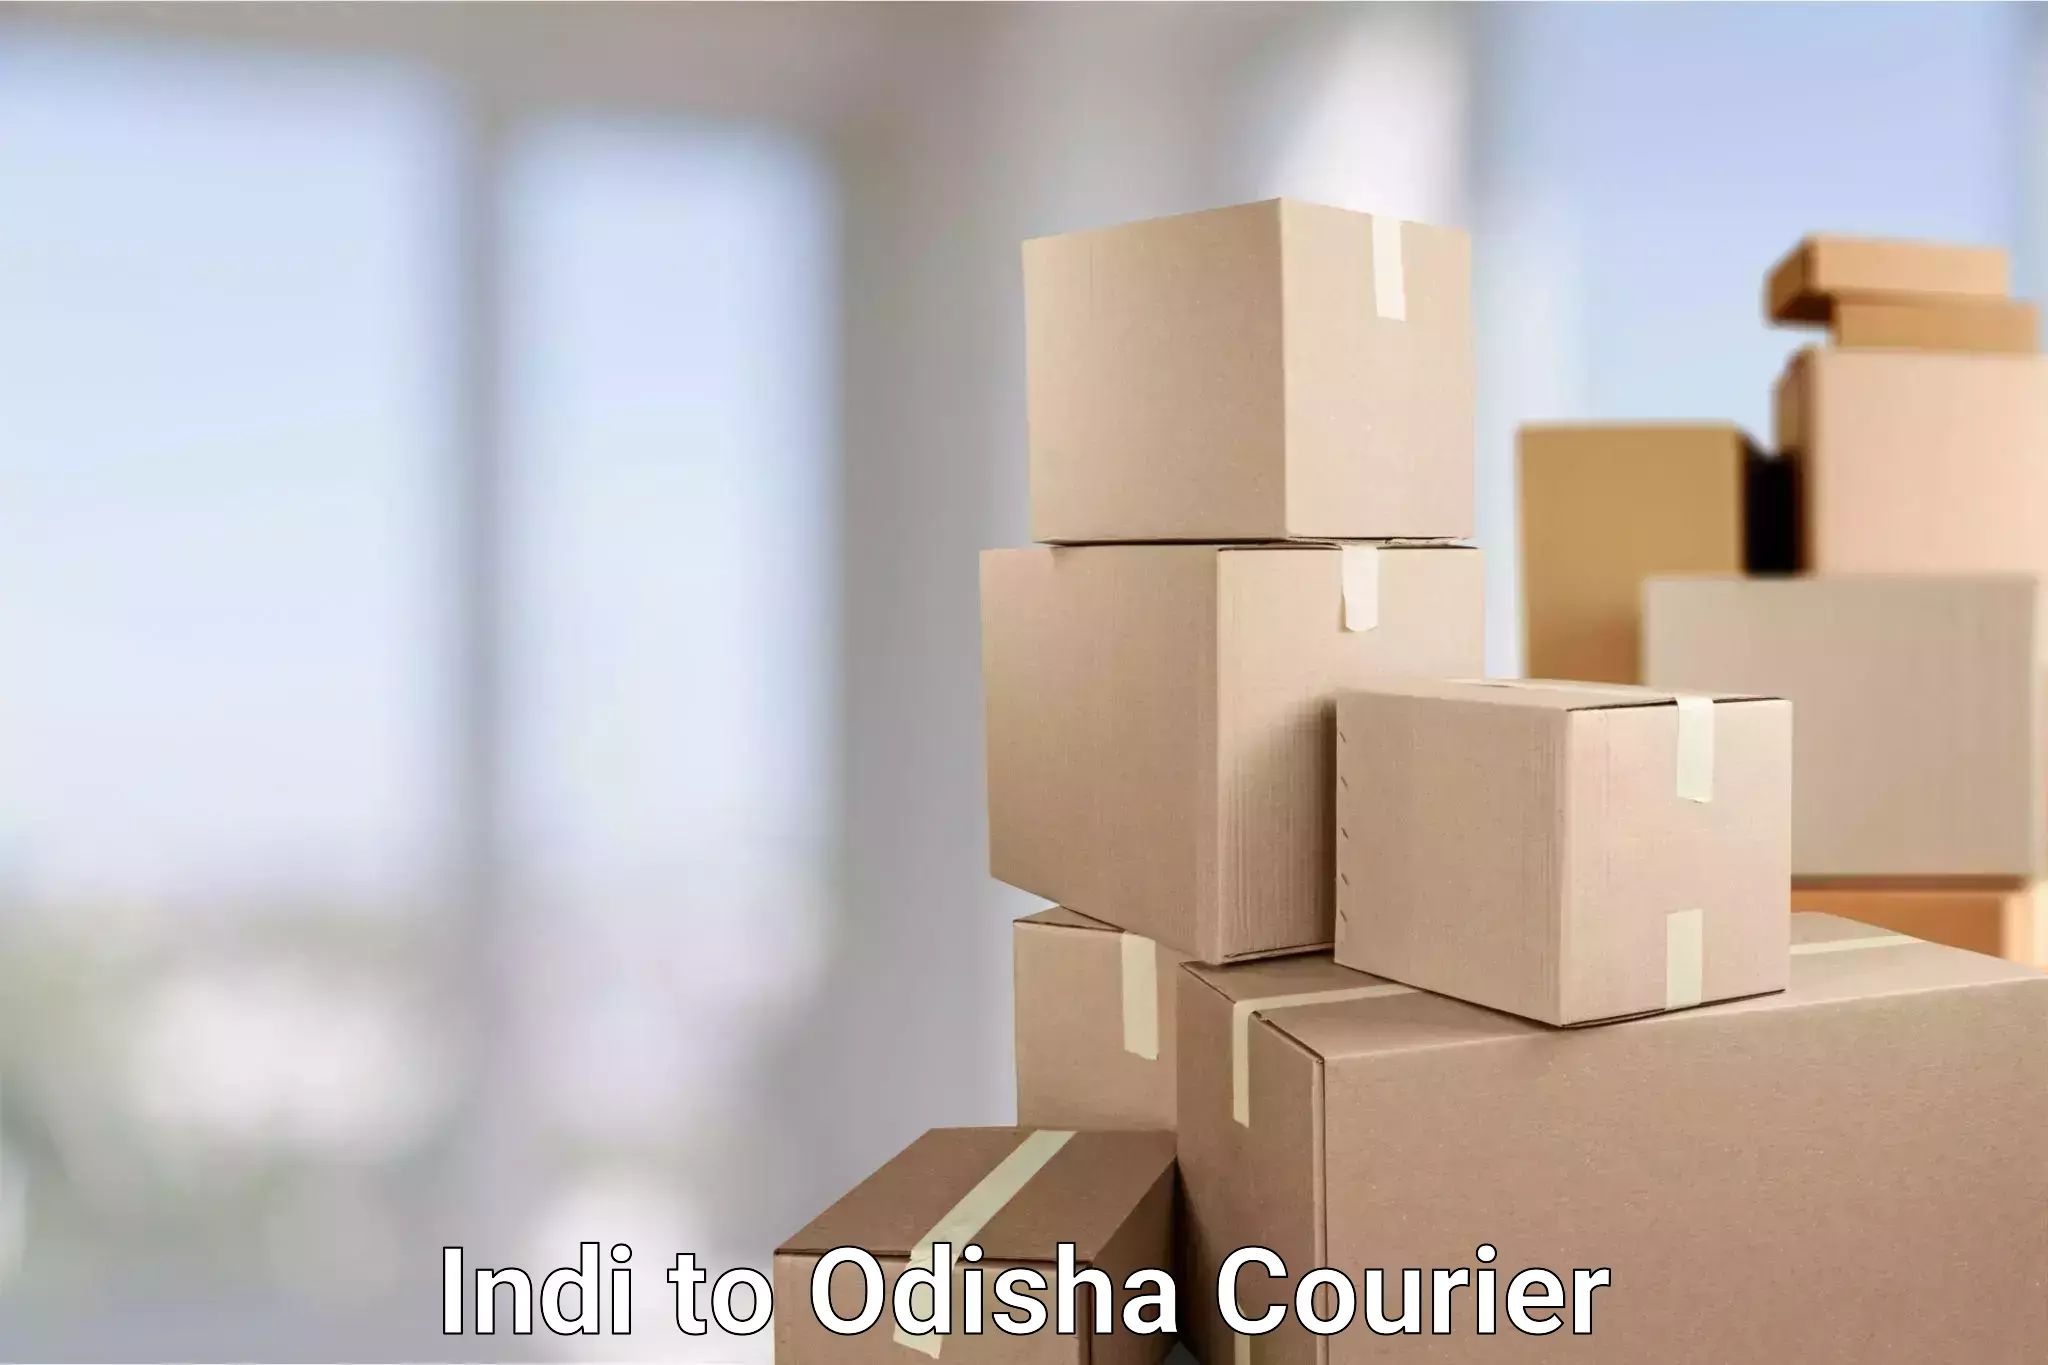 Multi-national courier services Indi to Odisha